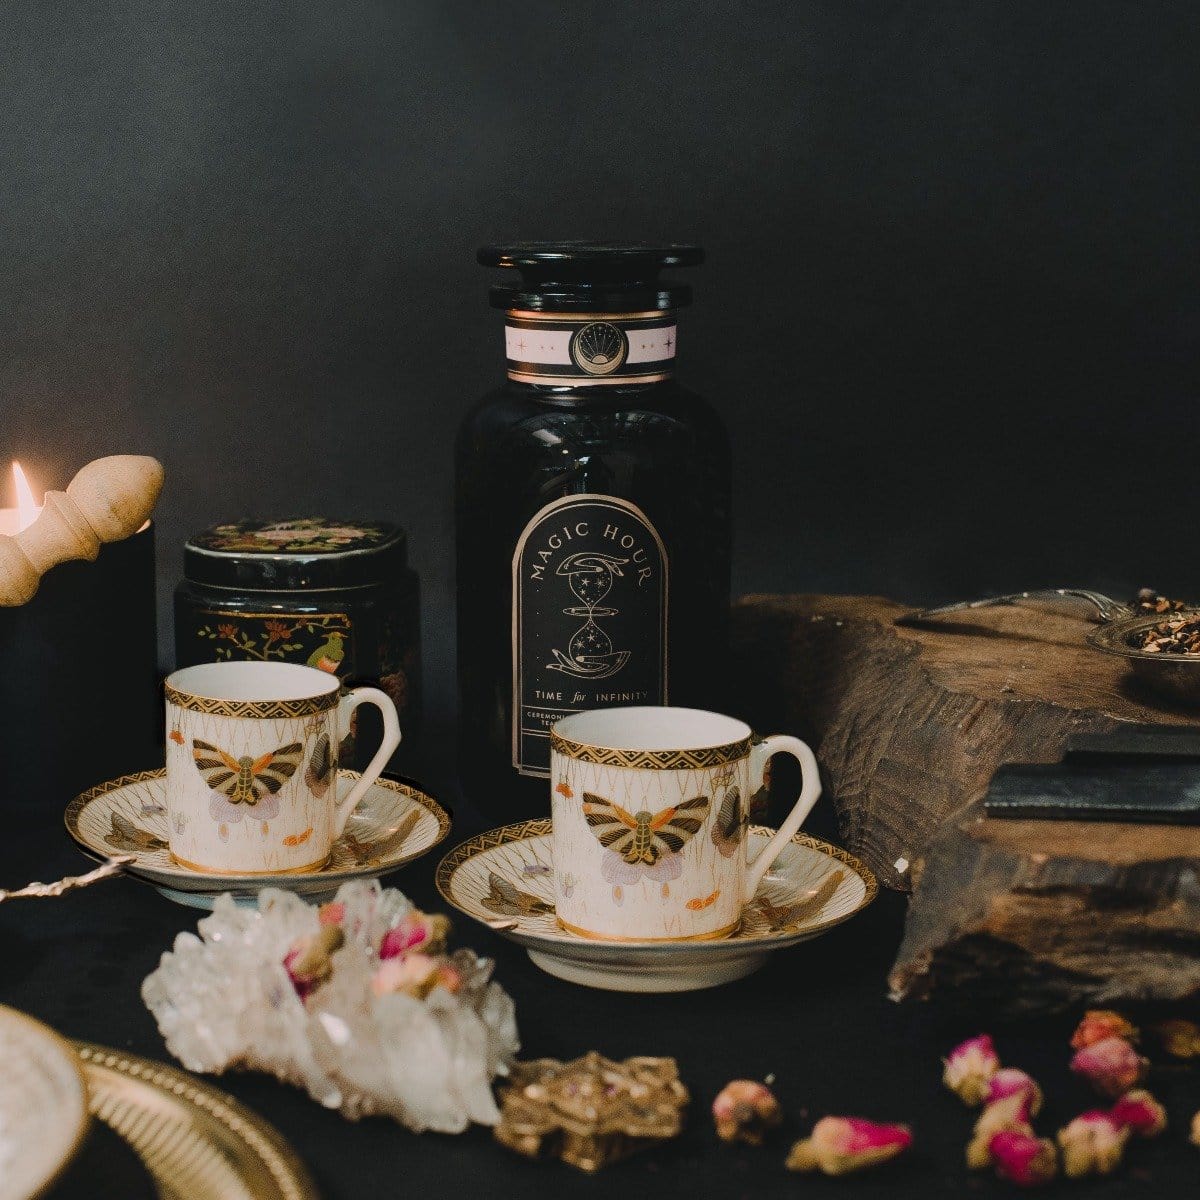 A beautifully styled scene features two ornate teacups and saucers adorned with a butterfly design. Behind the teacups is a dark bottle labeled &quot;Gypsy Rose Black Tea&quot; by Magic Hour and a lit candle. Other items include crystal and dried flowers, all set against a dark backdrop.